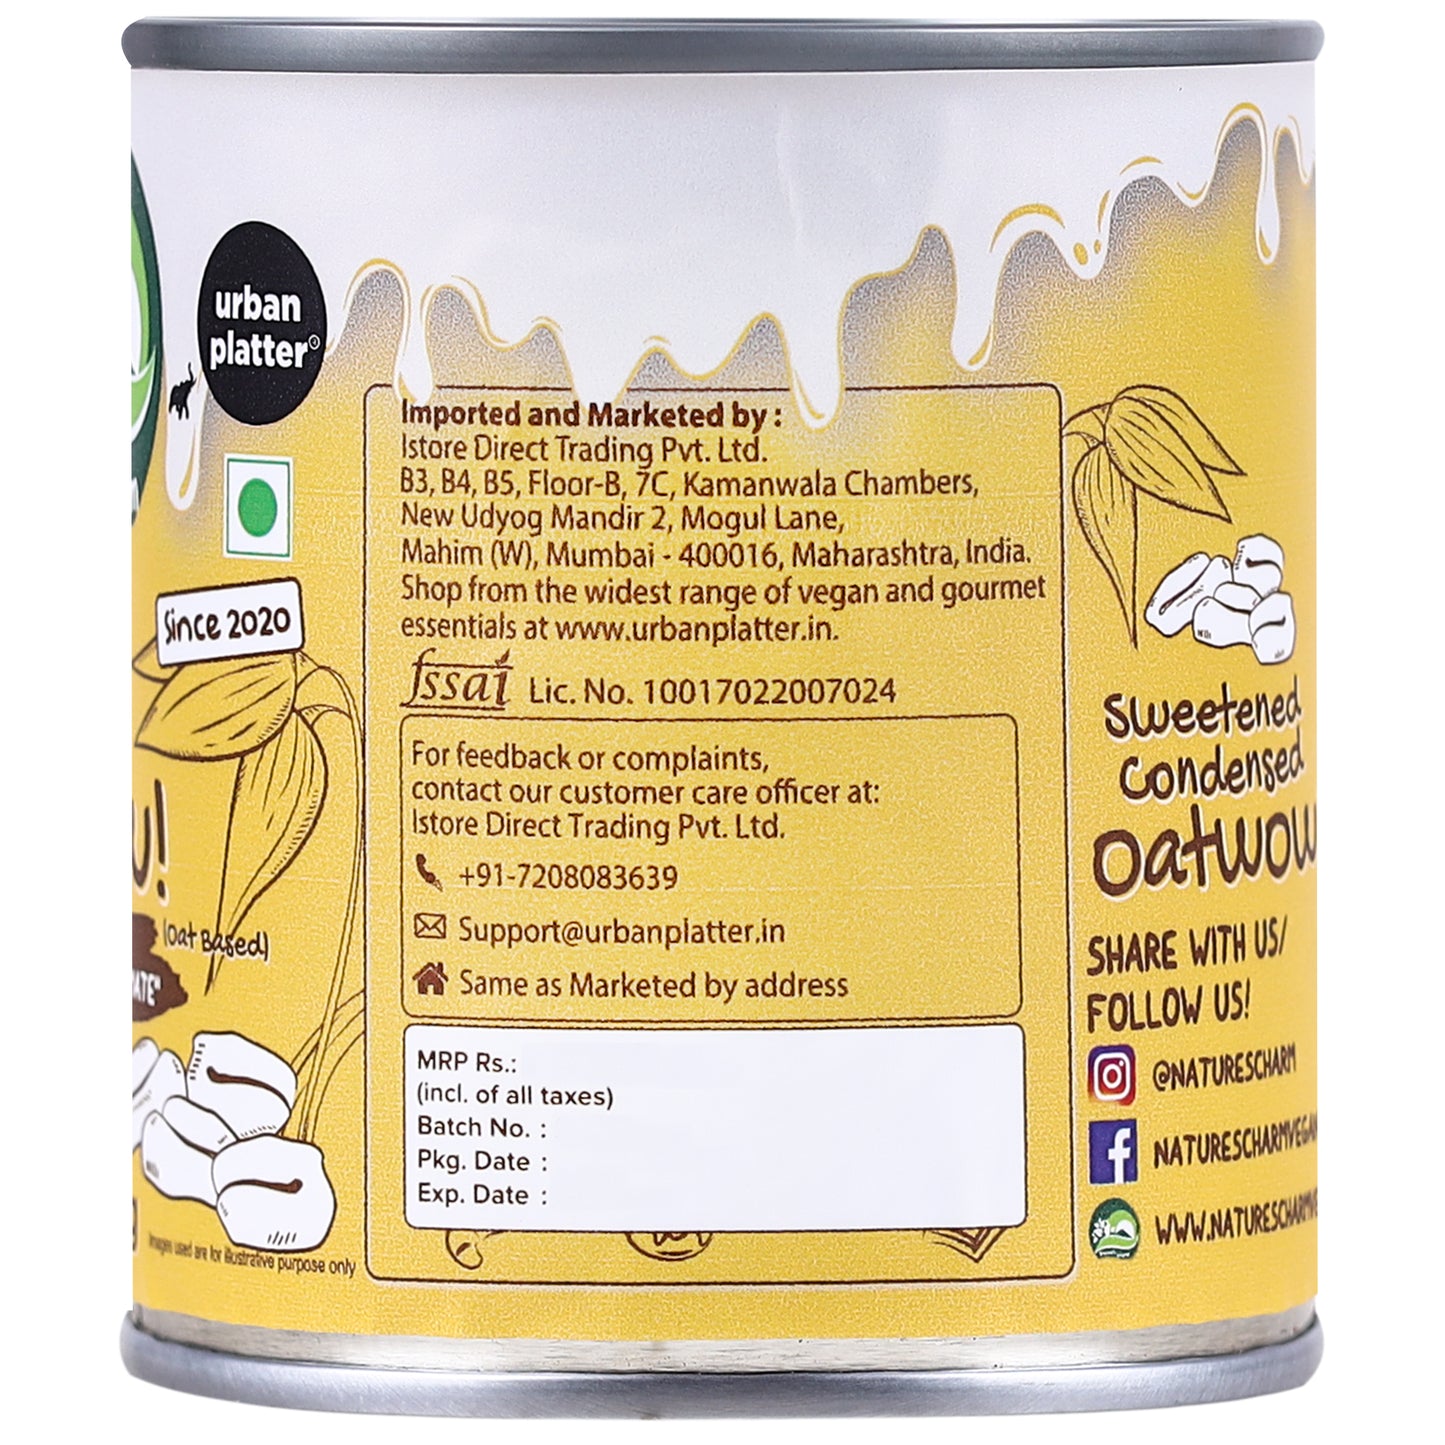 Urban Platter Sweetened Condensed Oatwow Dessert Mate, 320g (Product of Thailand, Oat-Based, Dairy &amp;  Soy Free, Perfect for Cakes, Fudge, Cookies)